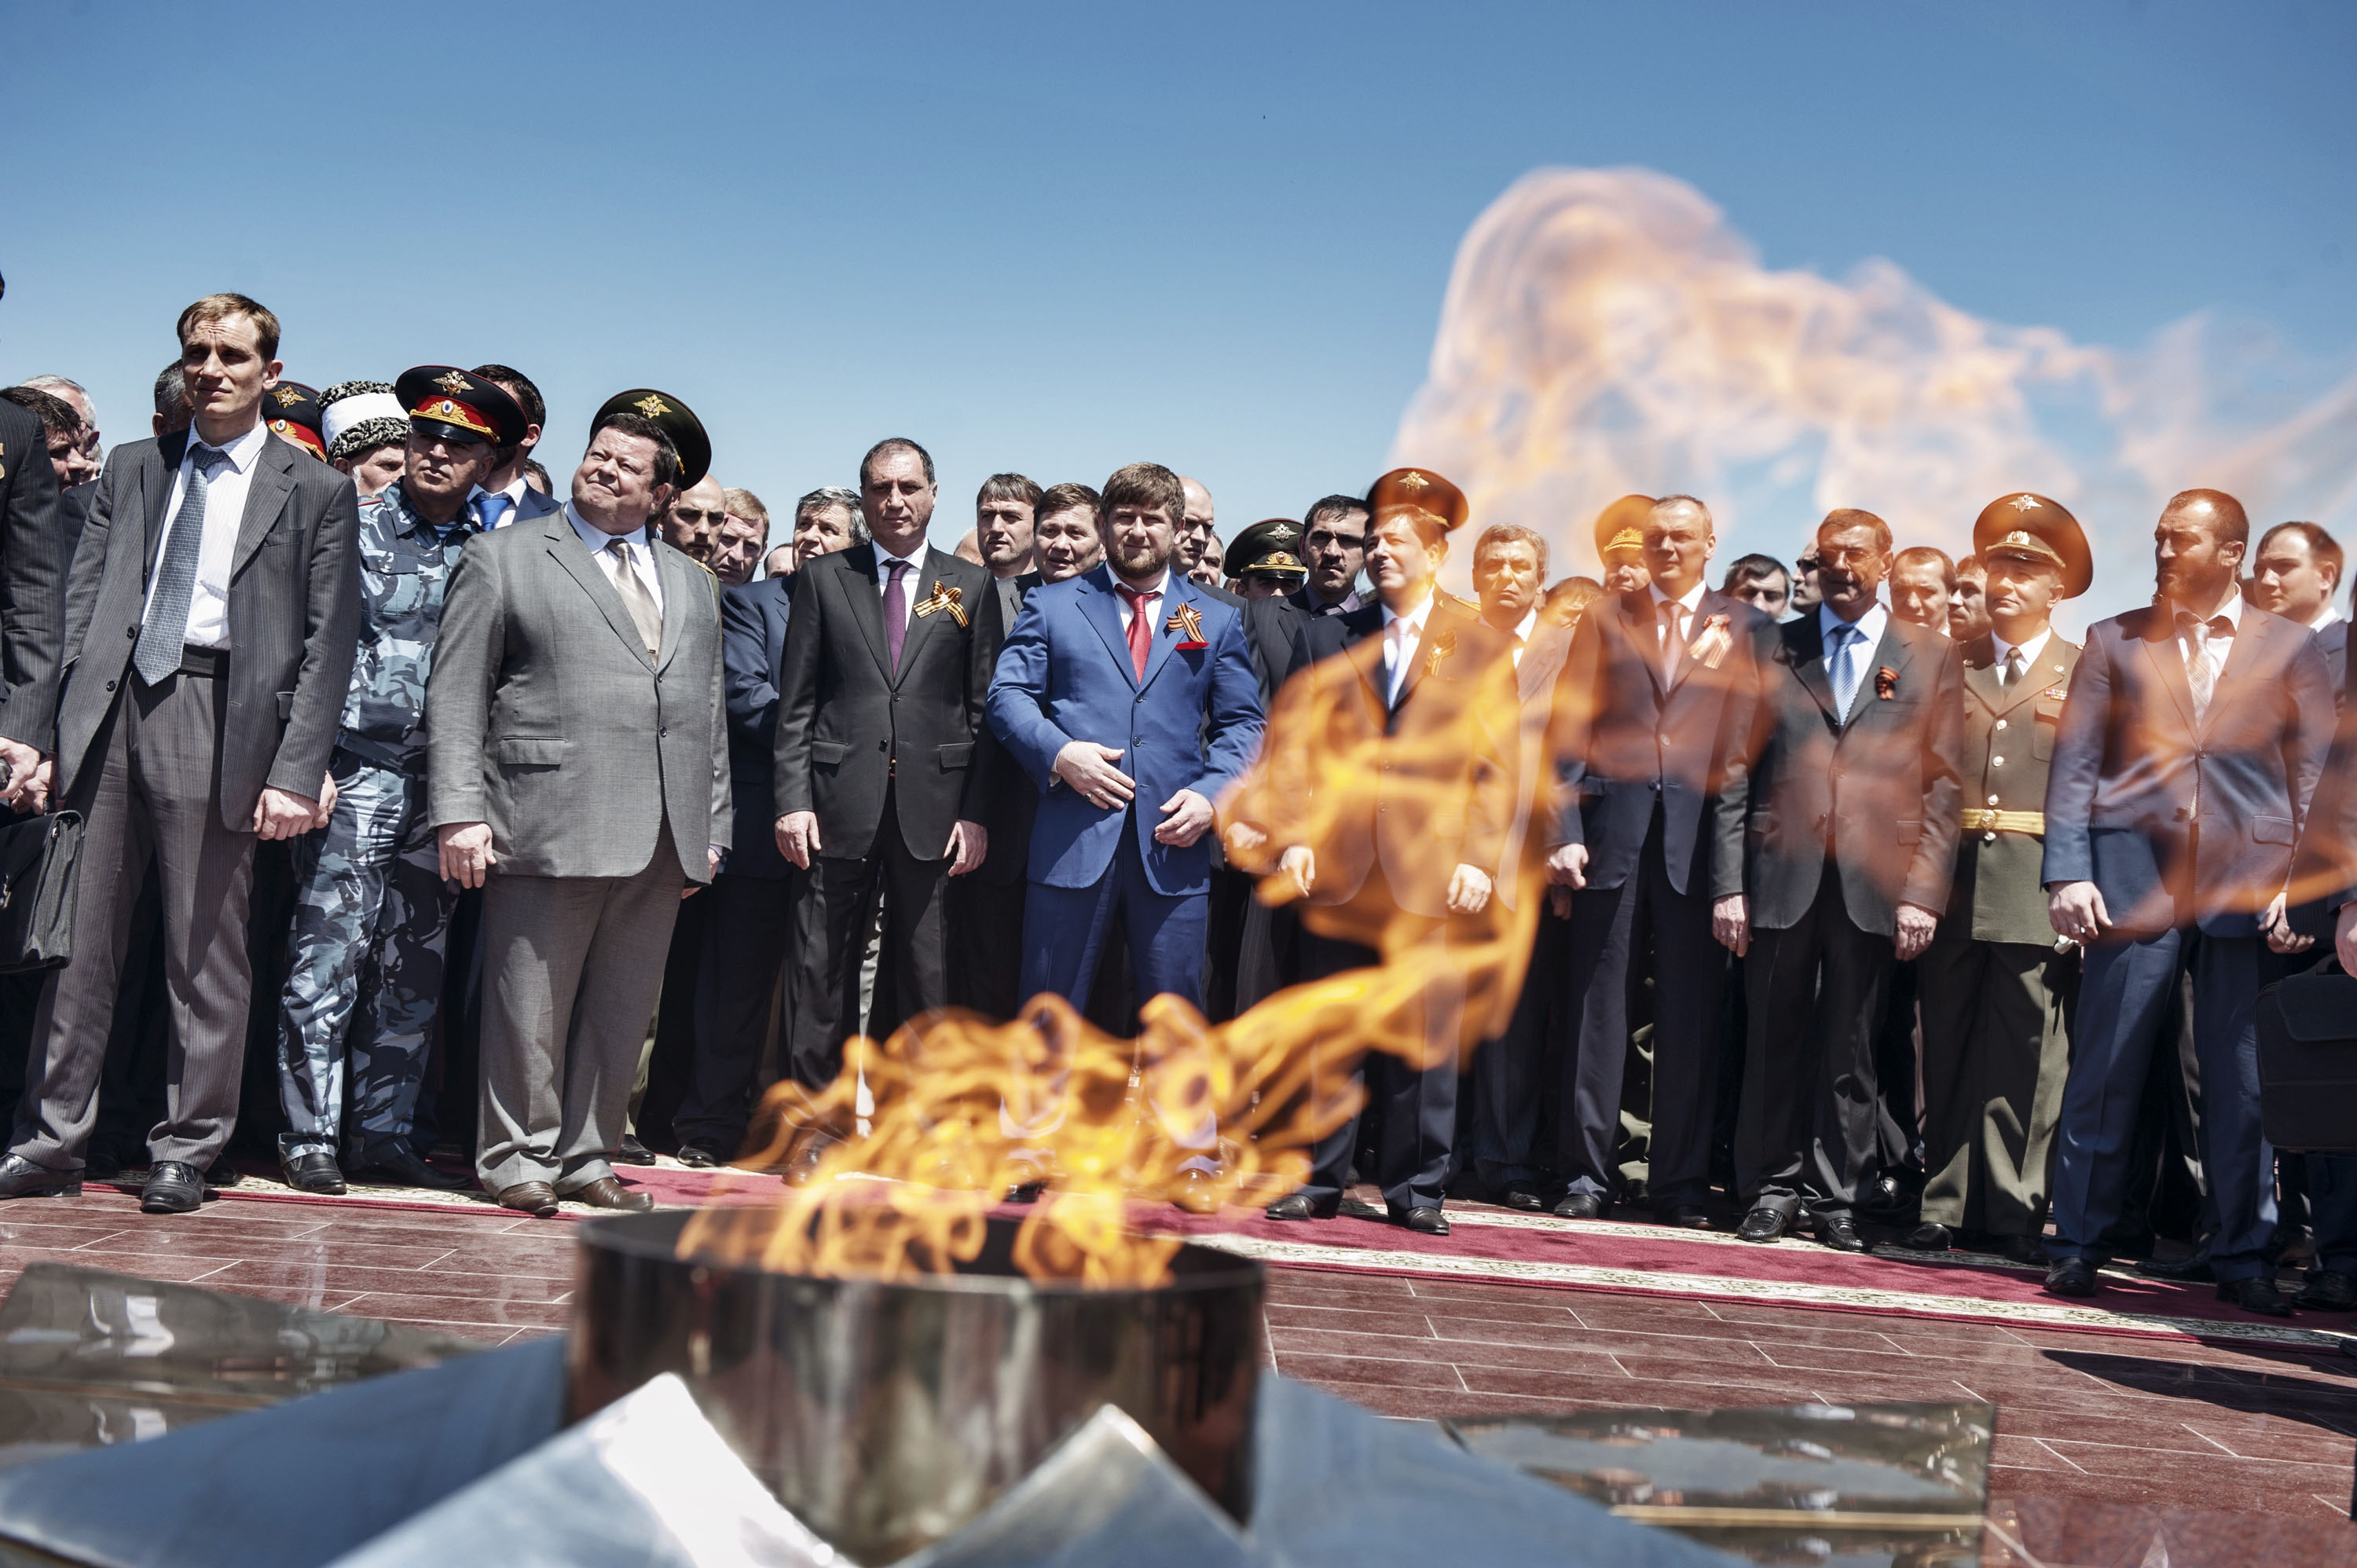 Kadyrov, center, stands with Chechen and Russian officials at a ceremony in Grozny in 2010 commemorating the Soviet victory in World War II. (Yuri Kozyrev—NOOR for TIME)